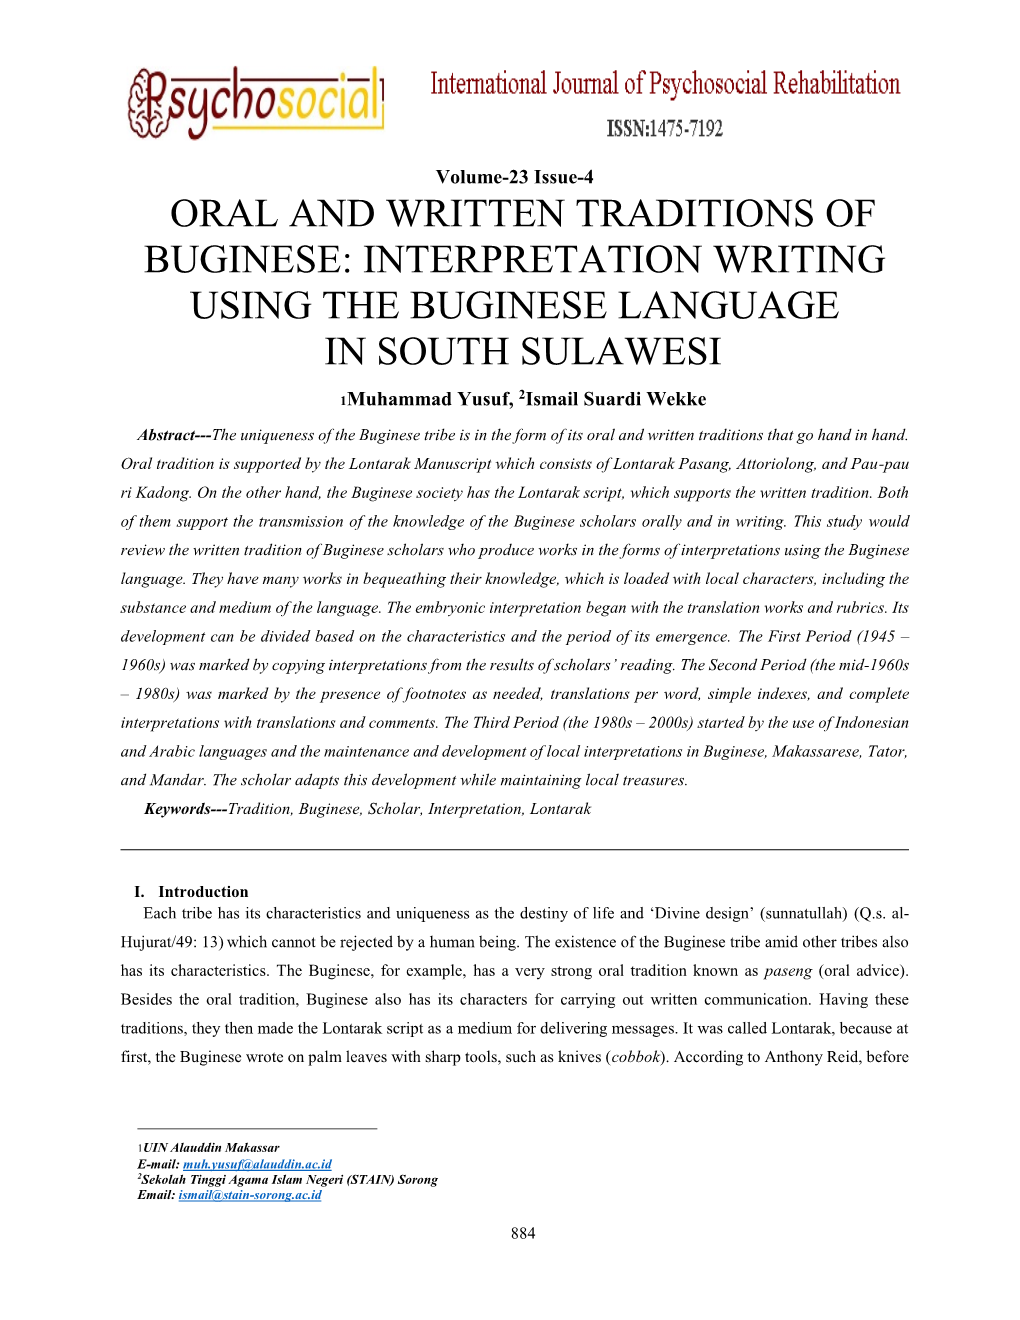 Oral and Written Traditions of Buginese: Interpretation Writing Using the Buginese Language in South Sulawesi